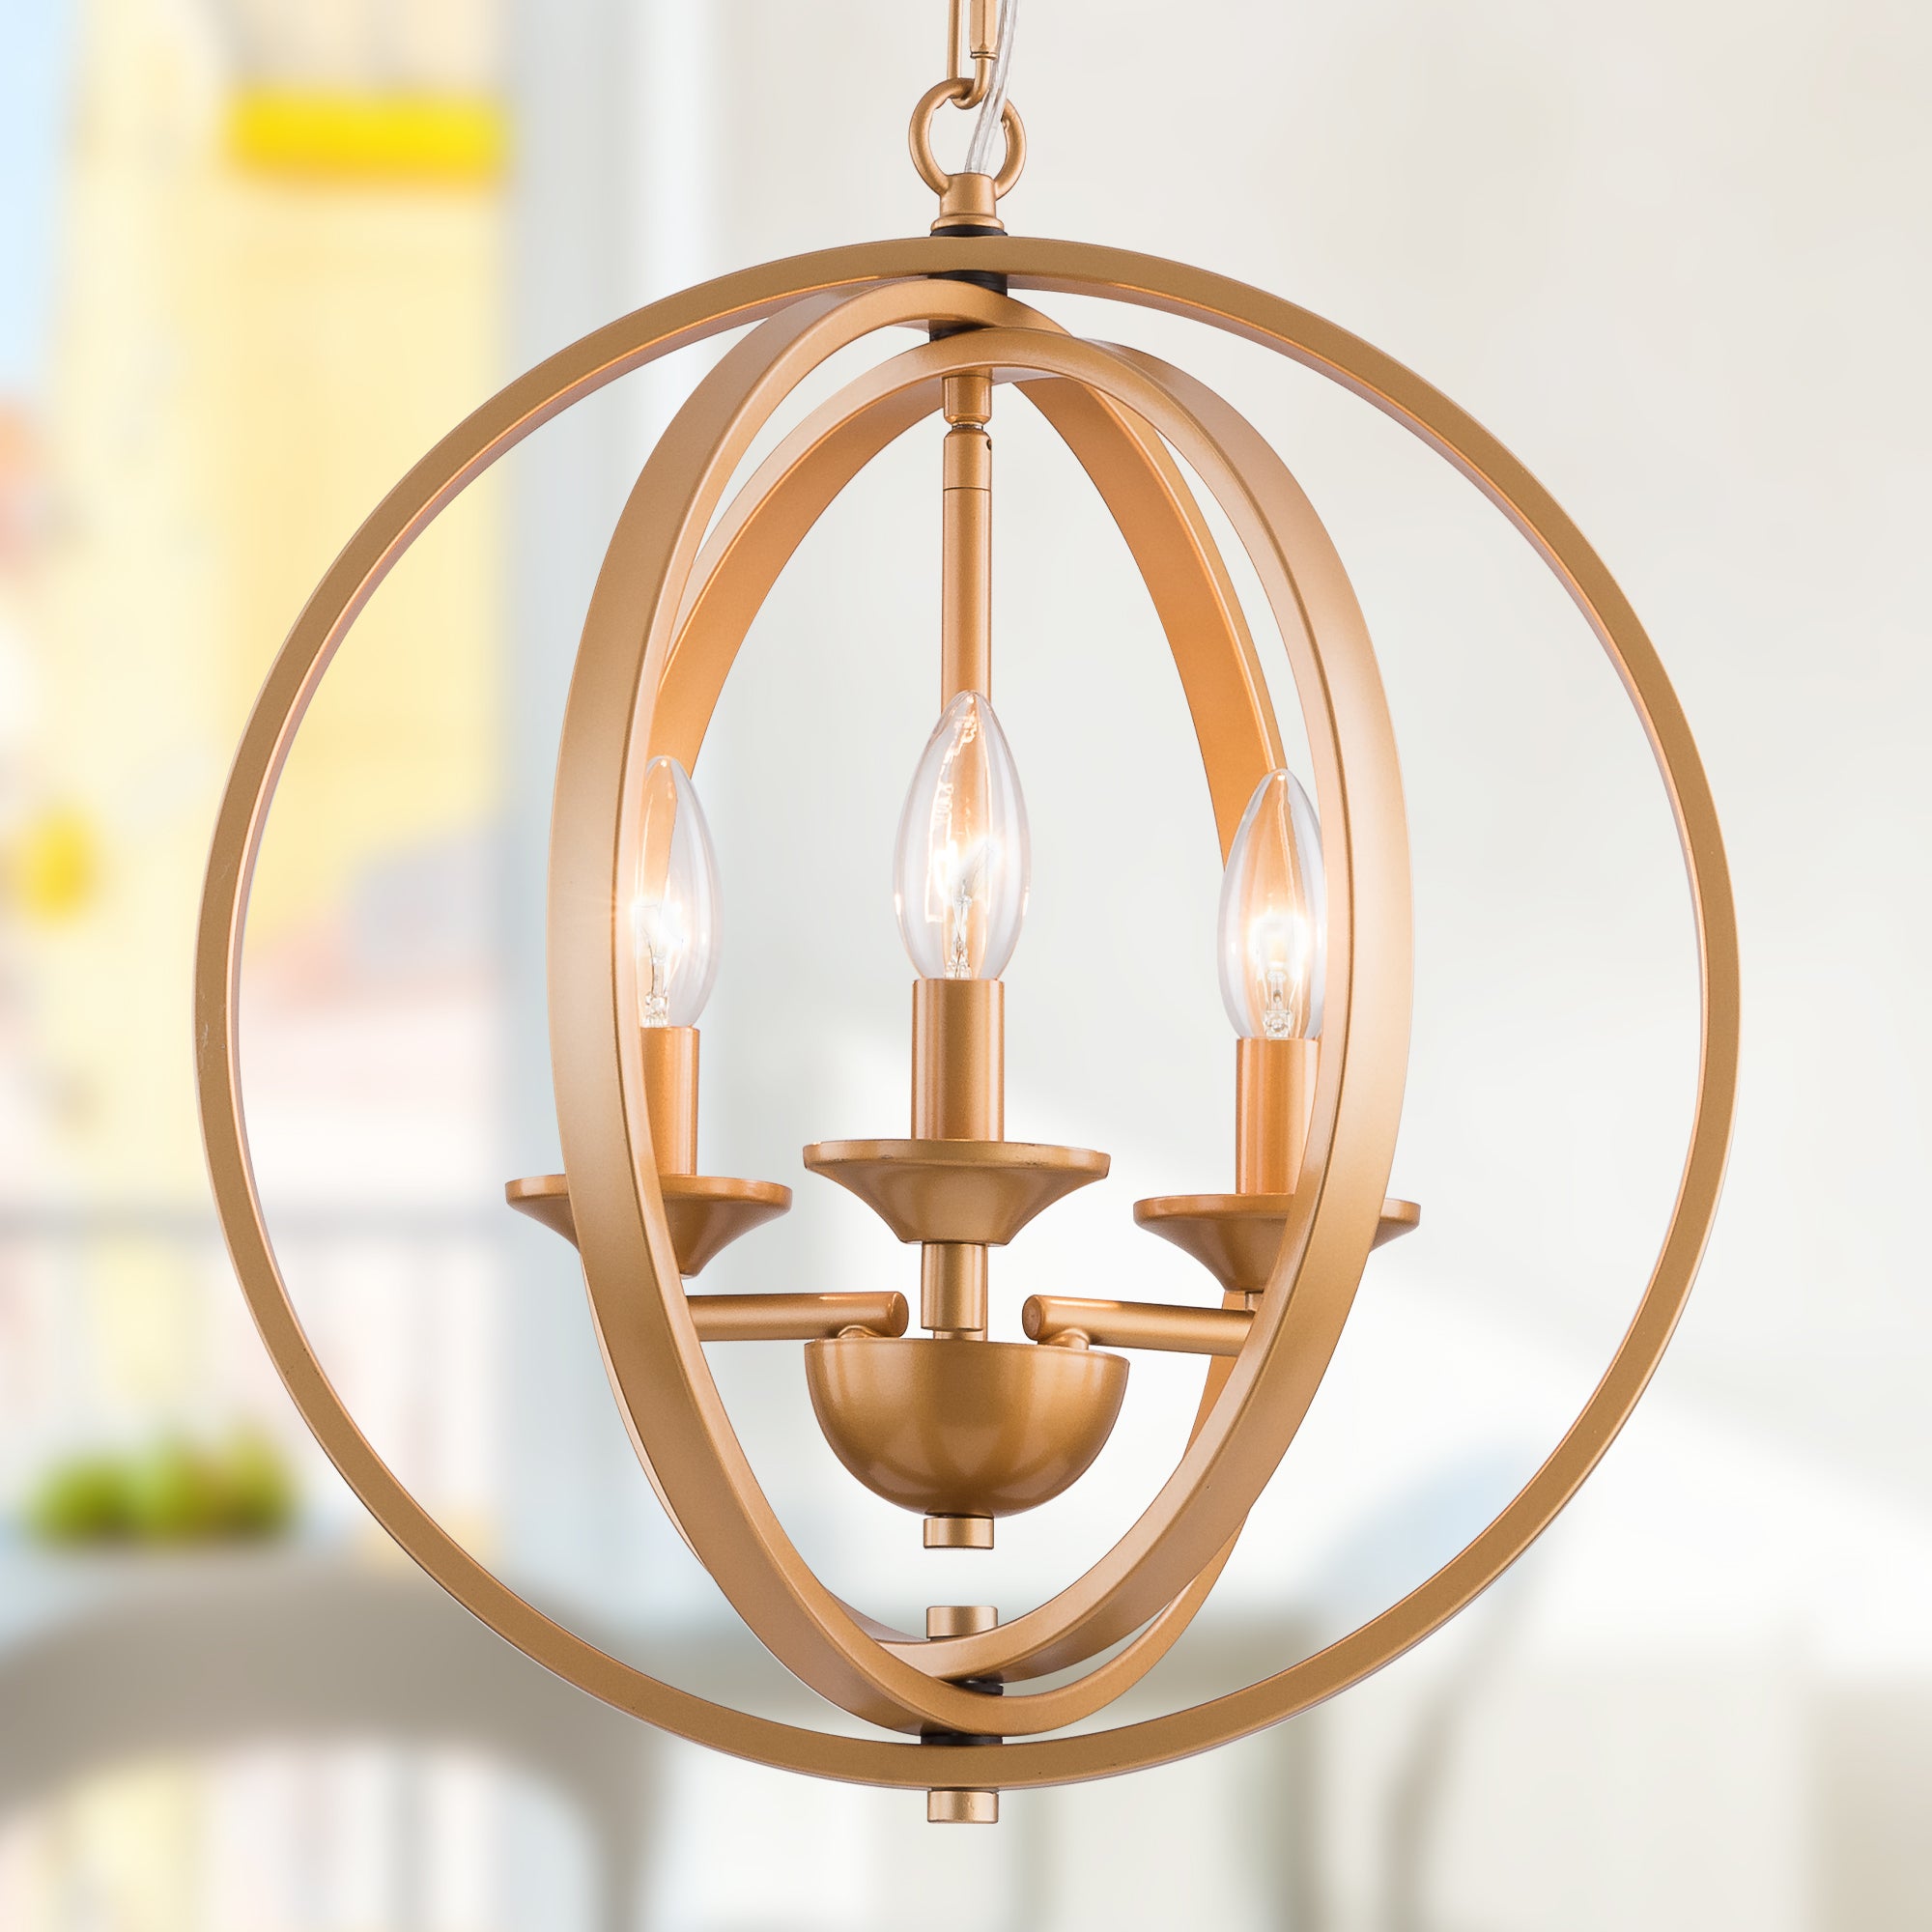 SIMPOL HOME Orb 3-Light Chandelier Globe Candle for Living Room, Rustic Farmhouse Flush Mount Ceiling Light Fixture, Height Adjustable Metal Pendant Lighting for Bedroom Hallway Kitchen Island Dining Room Foyer Entryway(Gold)